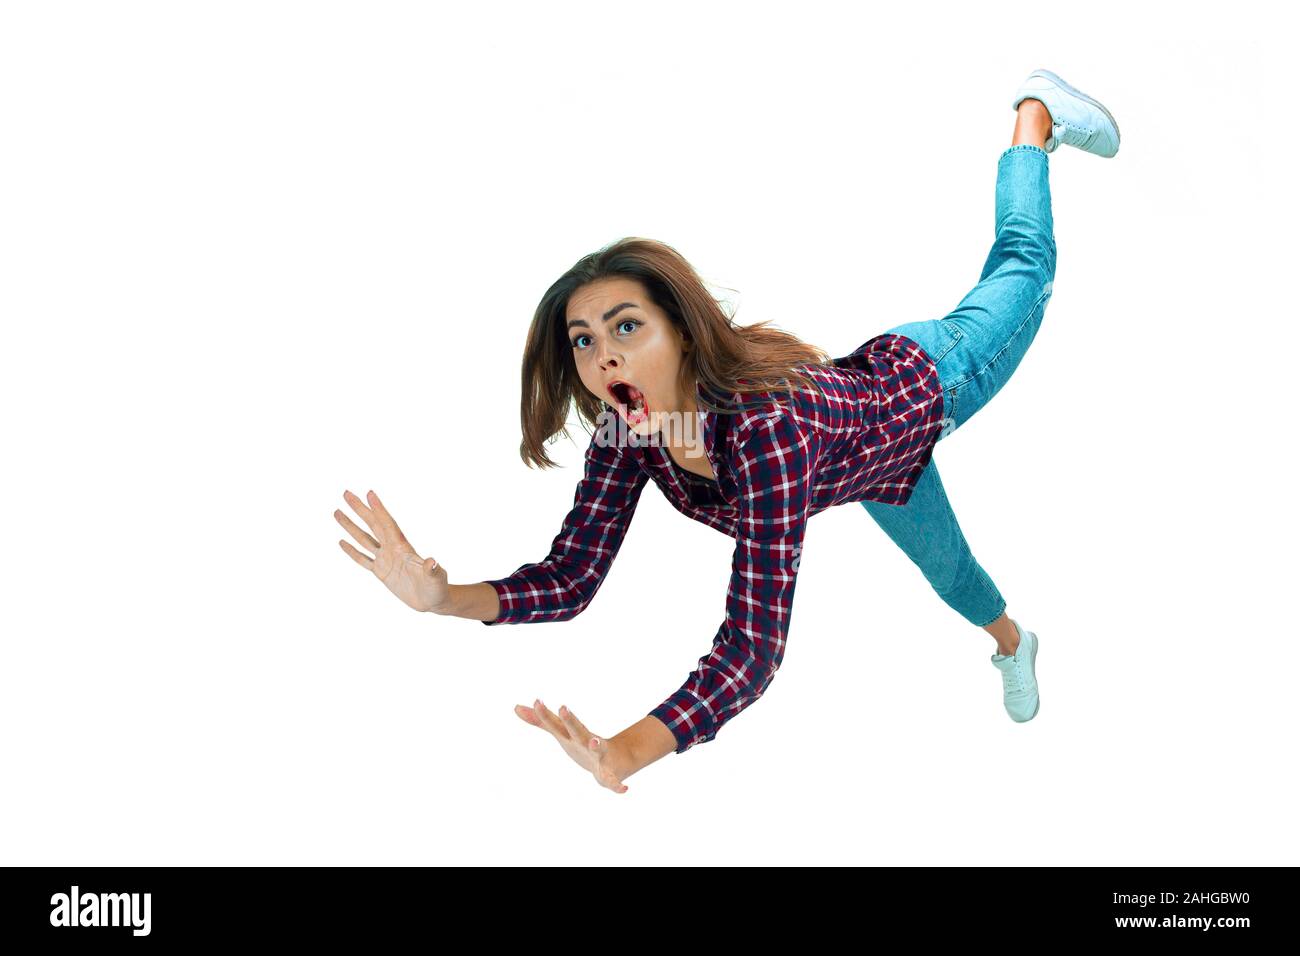 A second before falling. Caucasian young girl falling down in moment with bright emotions and facial expression. Female model in casual clothes. Shocked, scared, screaming. Copyspace for ad. Stock Photo